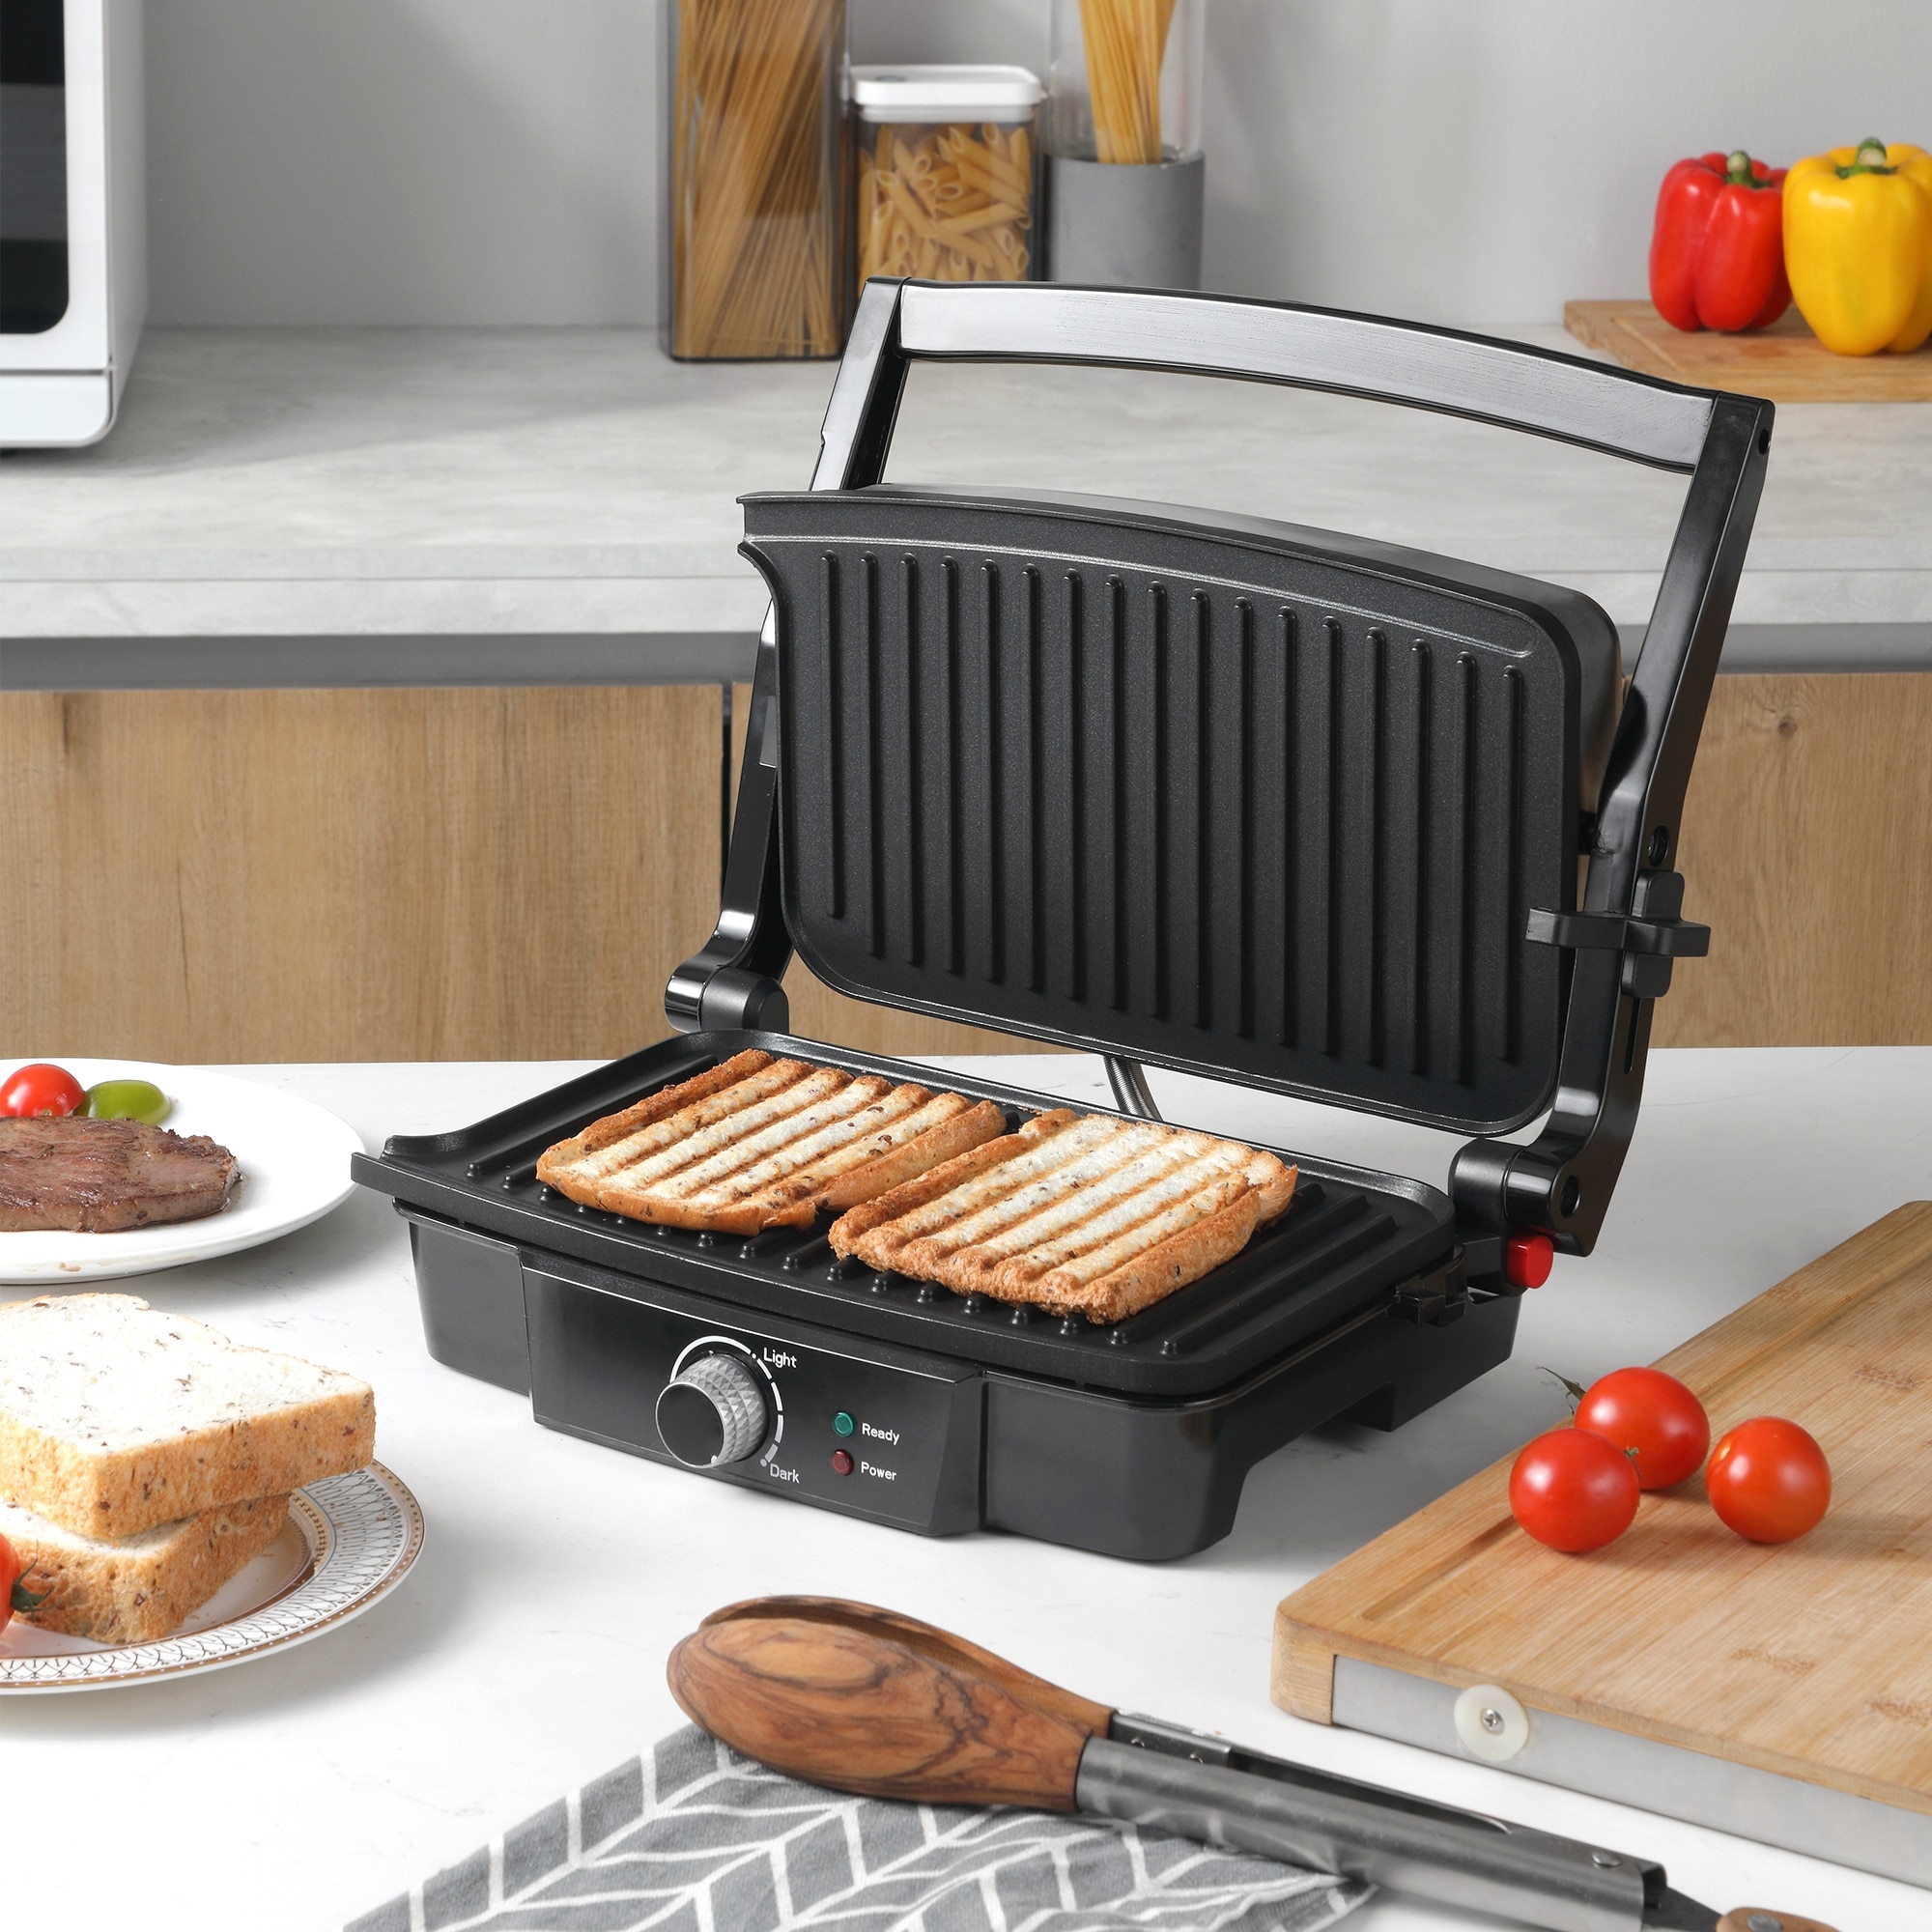 https://ak1.ostkcdn.com/images/products/is/images/direct/5e6a66f36abddf0c34cdc4aac9461fb708de5b98/HOMCOM-Panini-Press-Grill%2C-Stainless-Steel-Countertop-Sandwich-Maker-with-Non-Stick-Double-Plates%2C-Locking-Lids-and-Drip-Tray.jpg